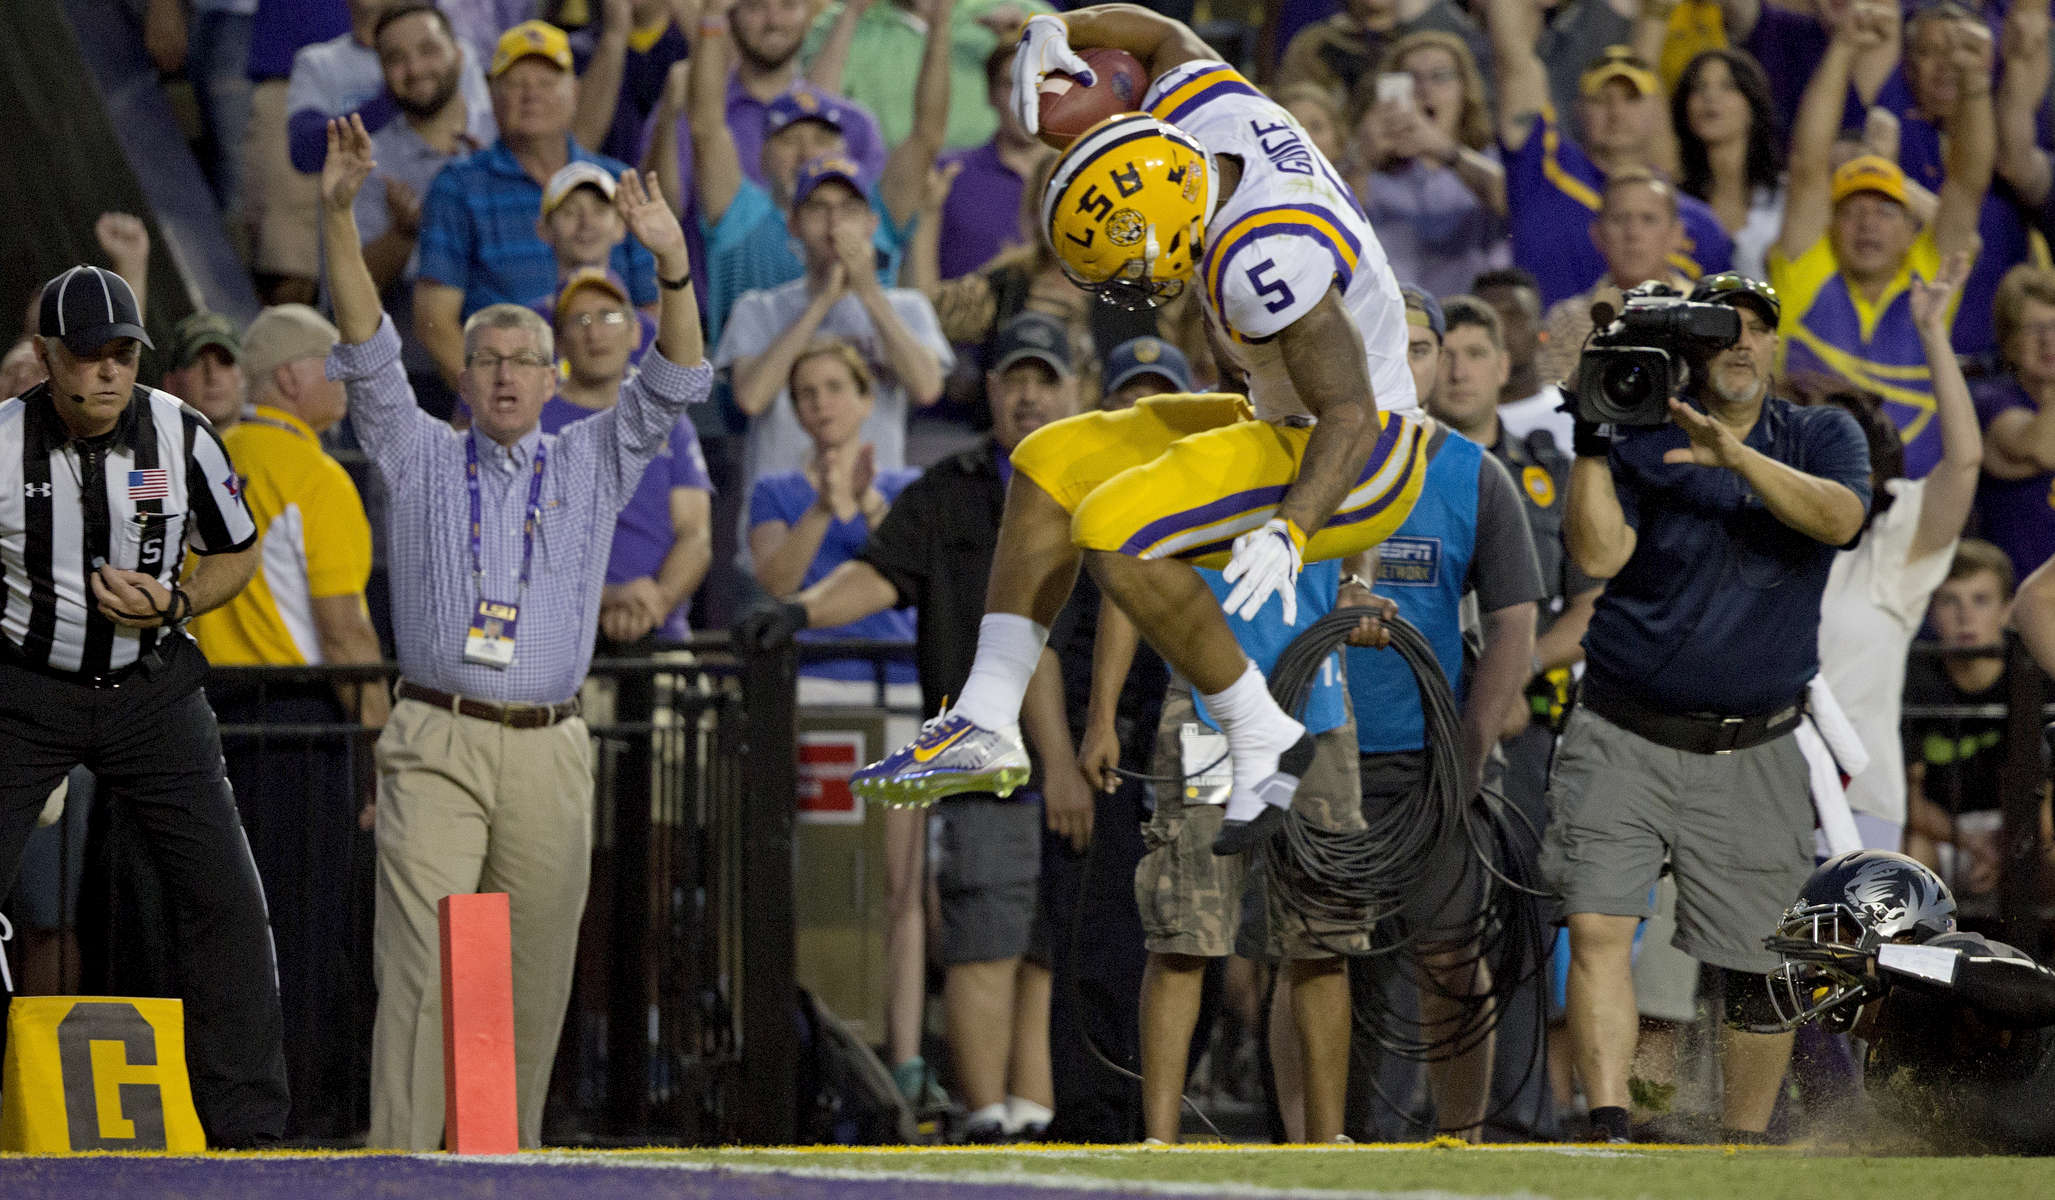 LSU running back Derrius Guice (5) leaps into the end zone in front of Missouri safety Thomas Wilson (8) during the first half of an NCAA college football game in Baton Rouge, La., Saturday, Oct. 1, 2016. (AP Photo/Max Becherer)